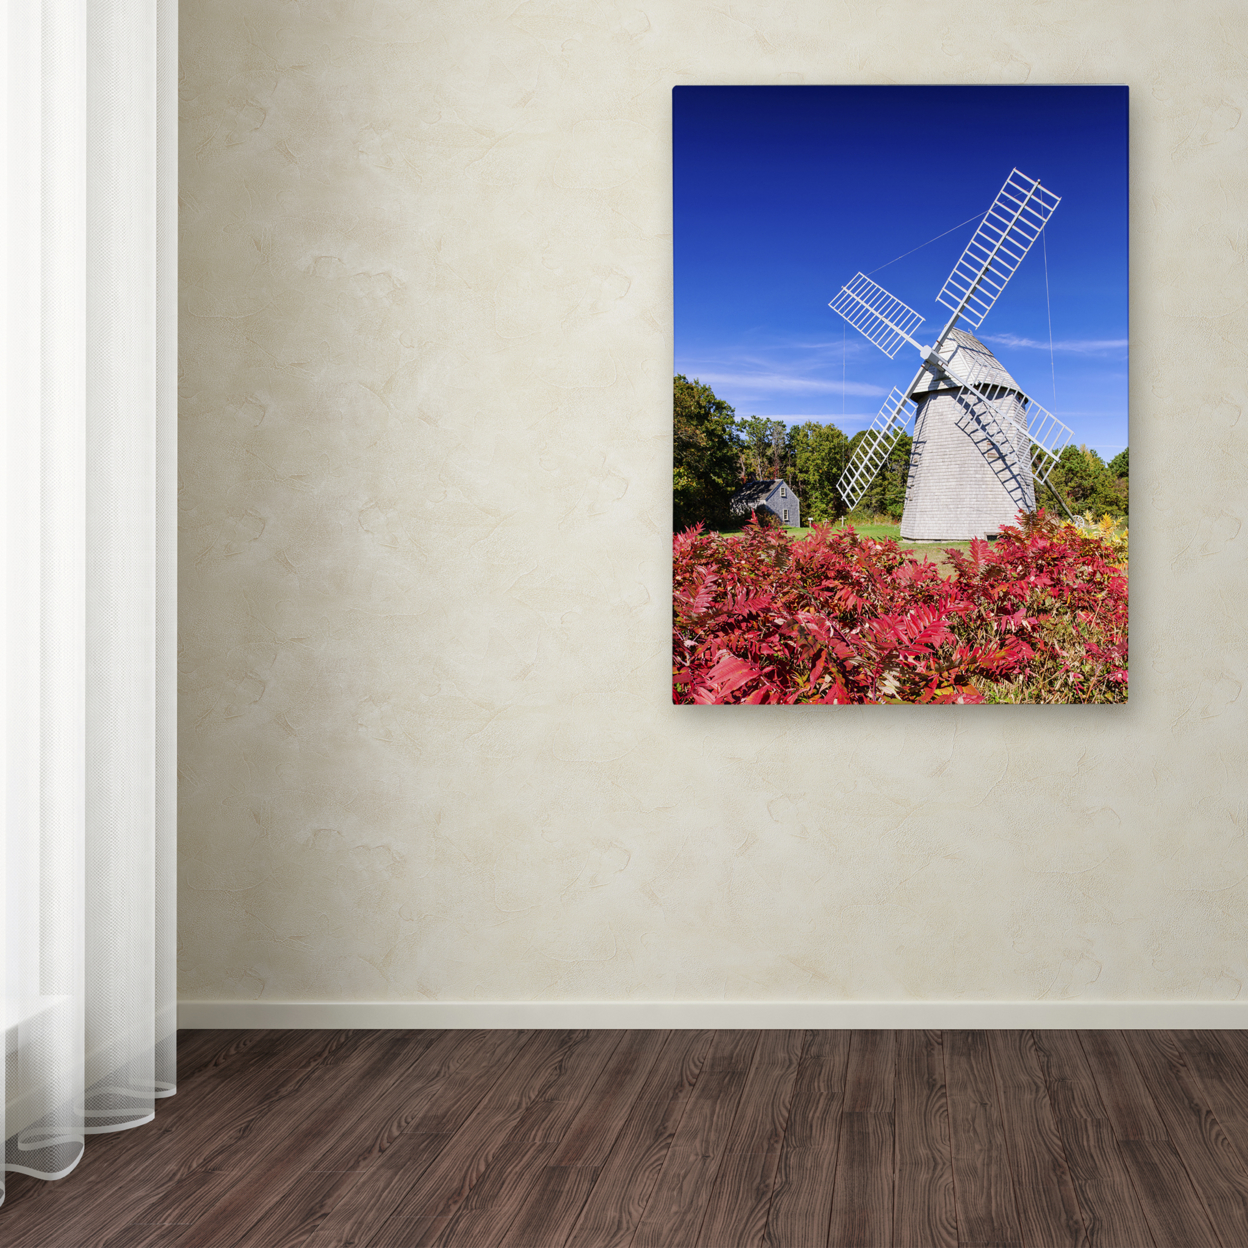 Michael Blanchette Photography 'Higgins Windmill' Canvas Wall Art 35 X 47 Inches